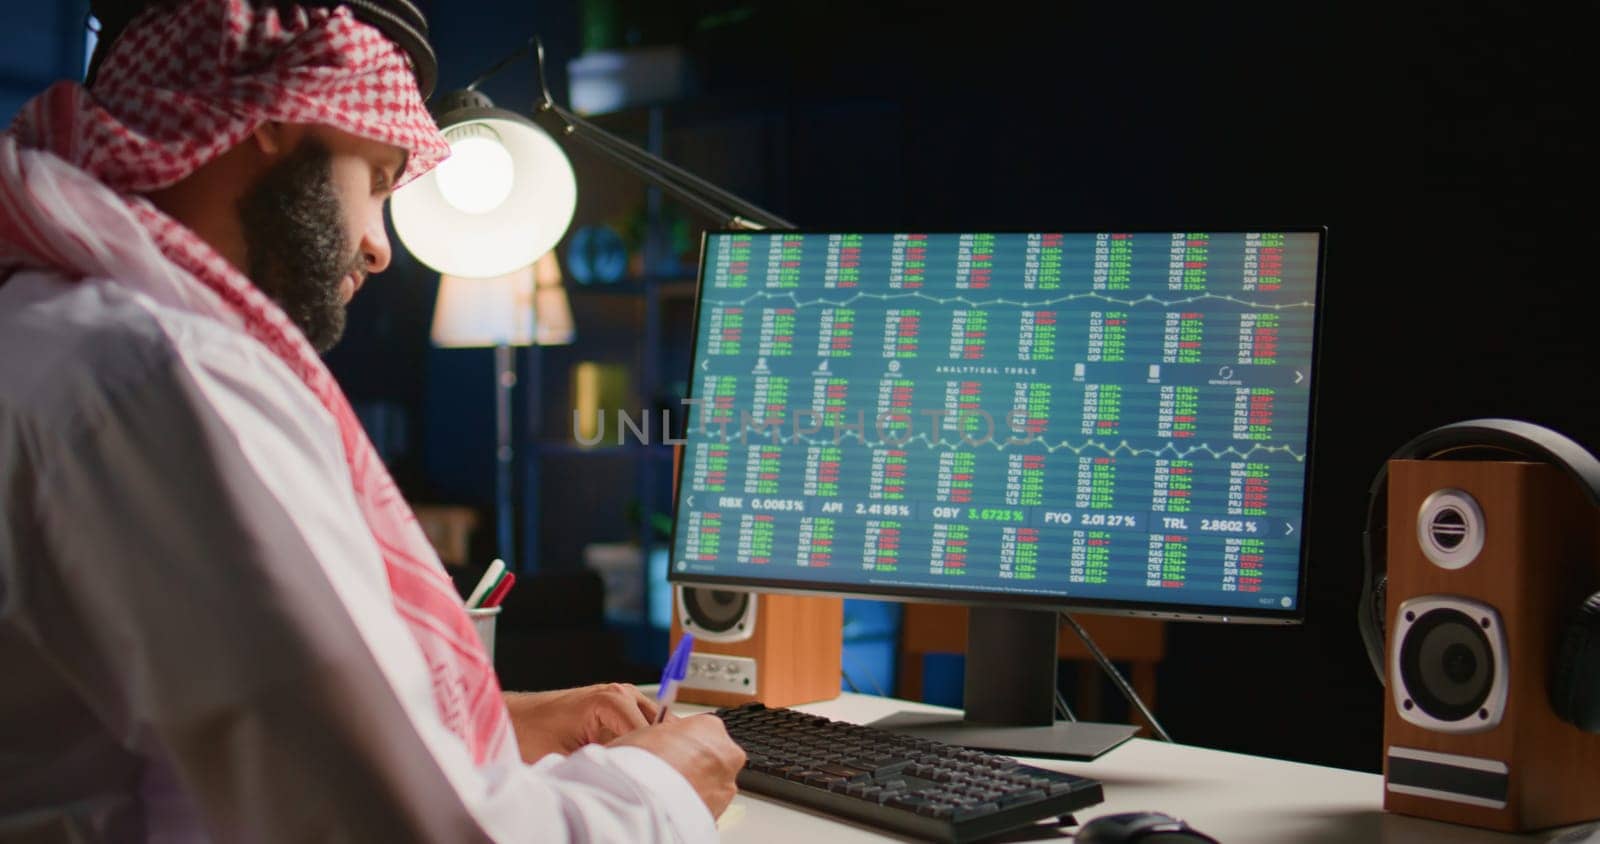 Muslim broker investor employee at office desk checking stock exchange valuation financial profit numbers. Arab company executive stockholder looking at market shares growth